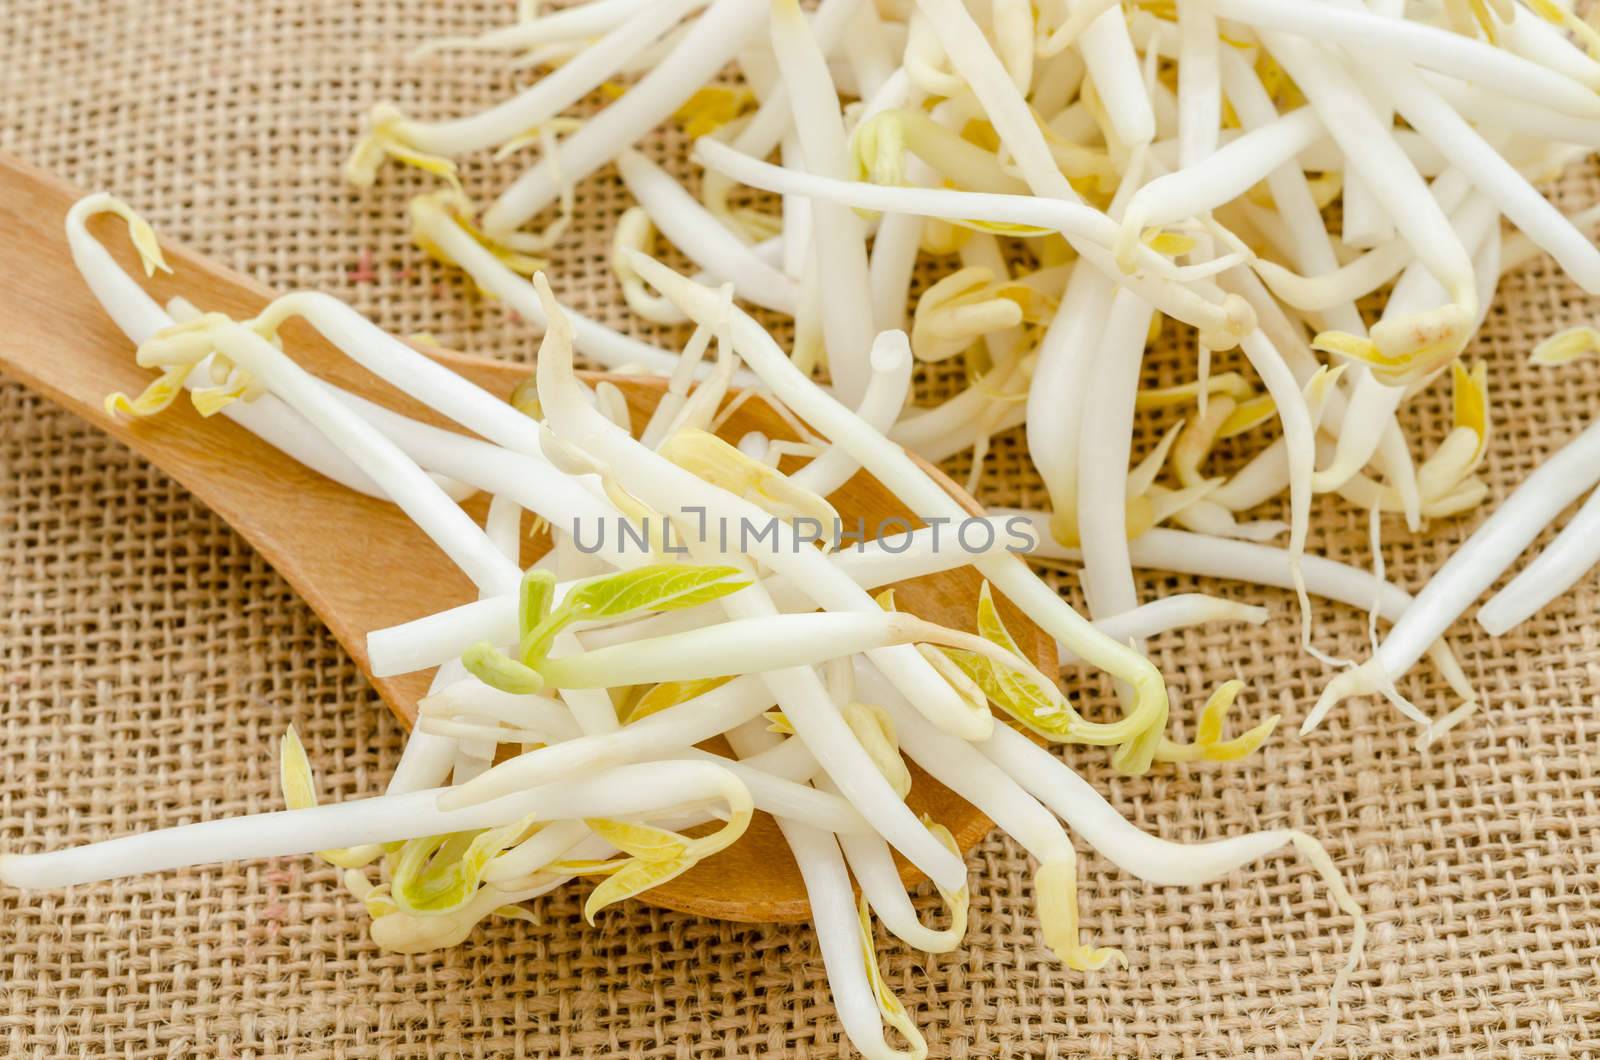 Mung beans or bean sprouts by Gamjai